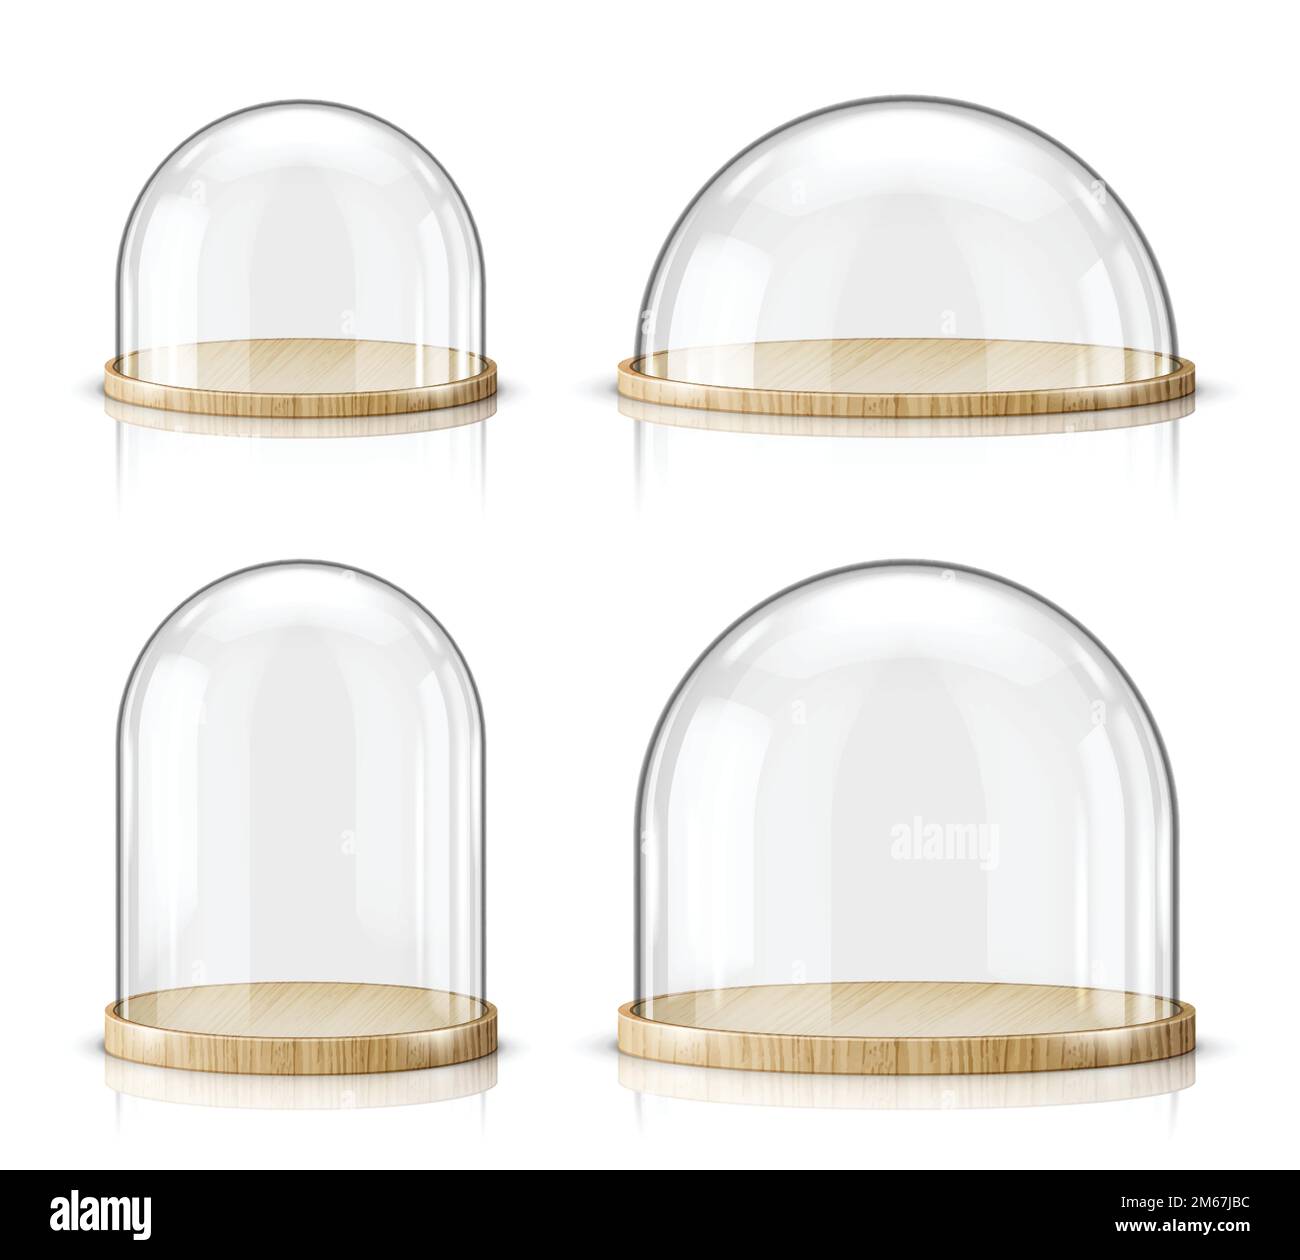 Glass dome and wooden tray realistic vector. Glass round dome of various shapes with light wood plate, food storage container or product presentation case with reflection, isolated on white background Stock Vector